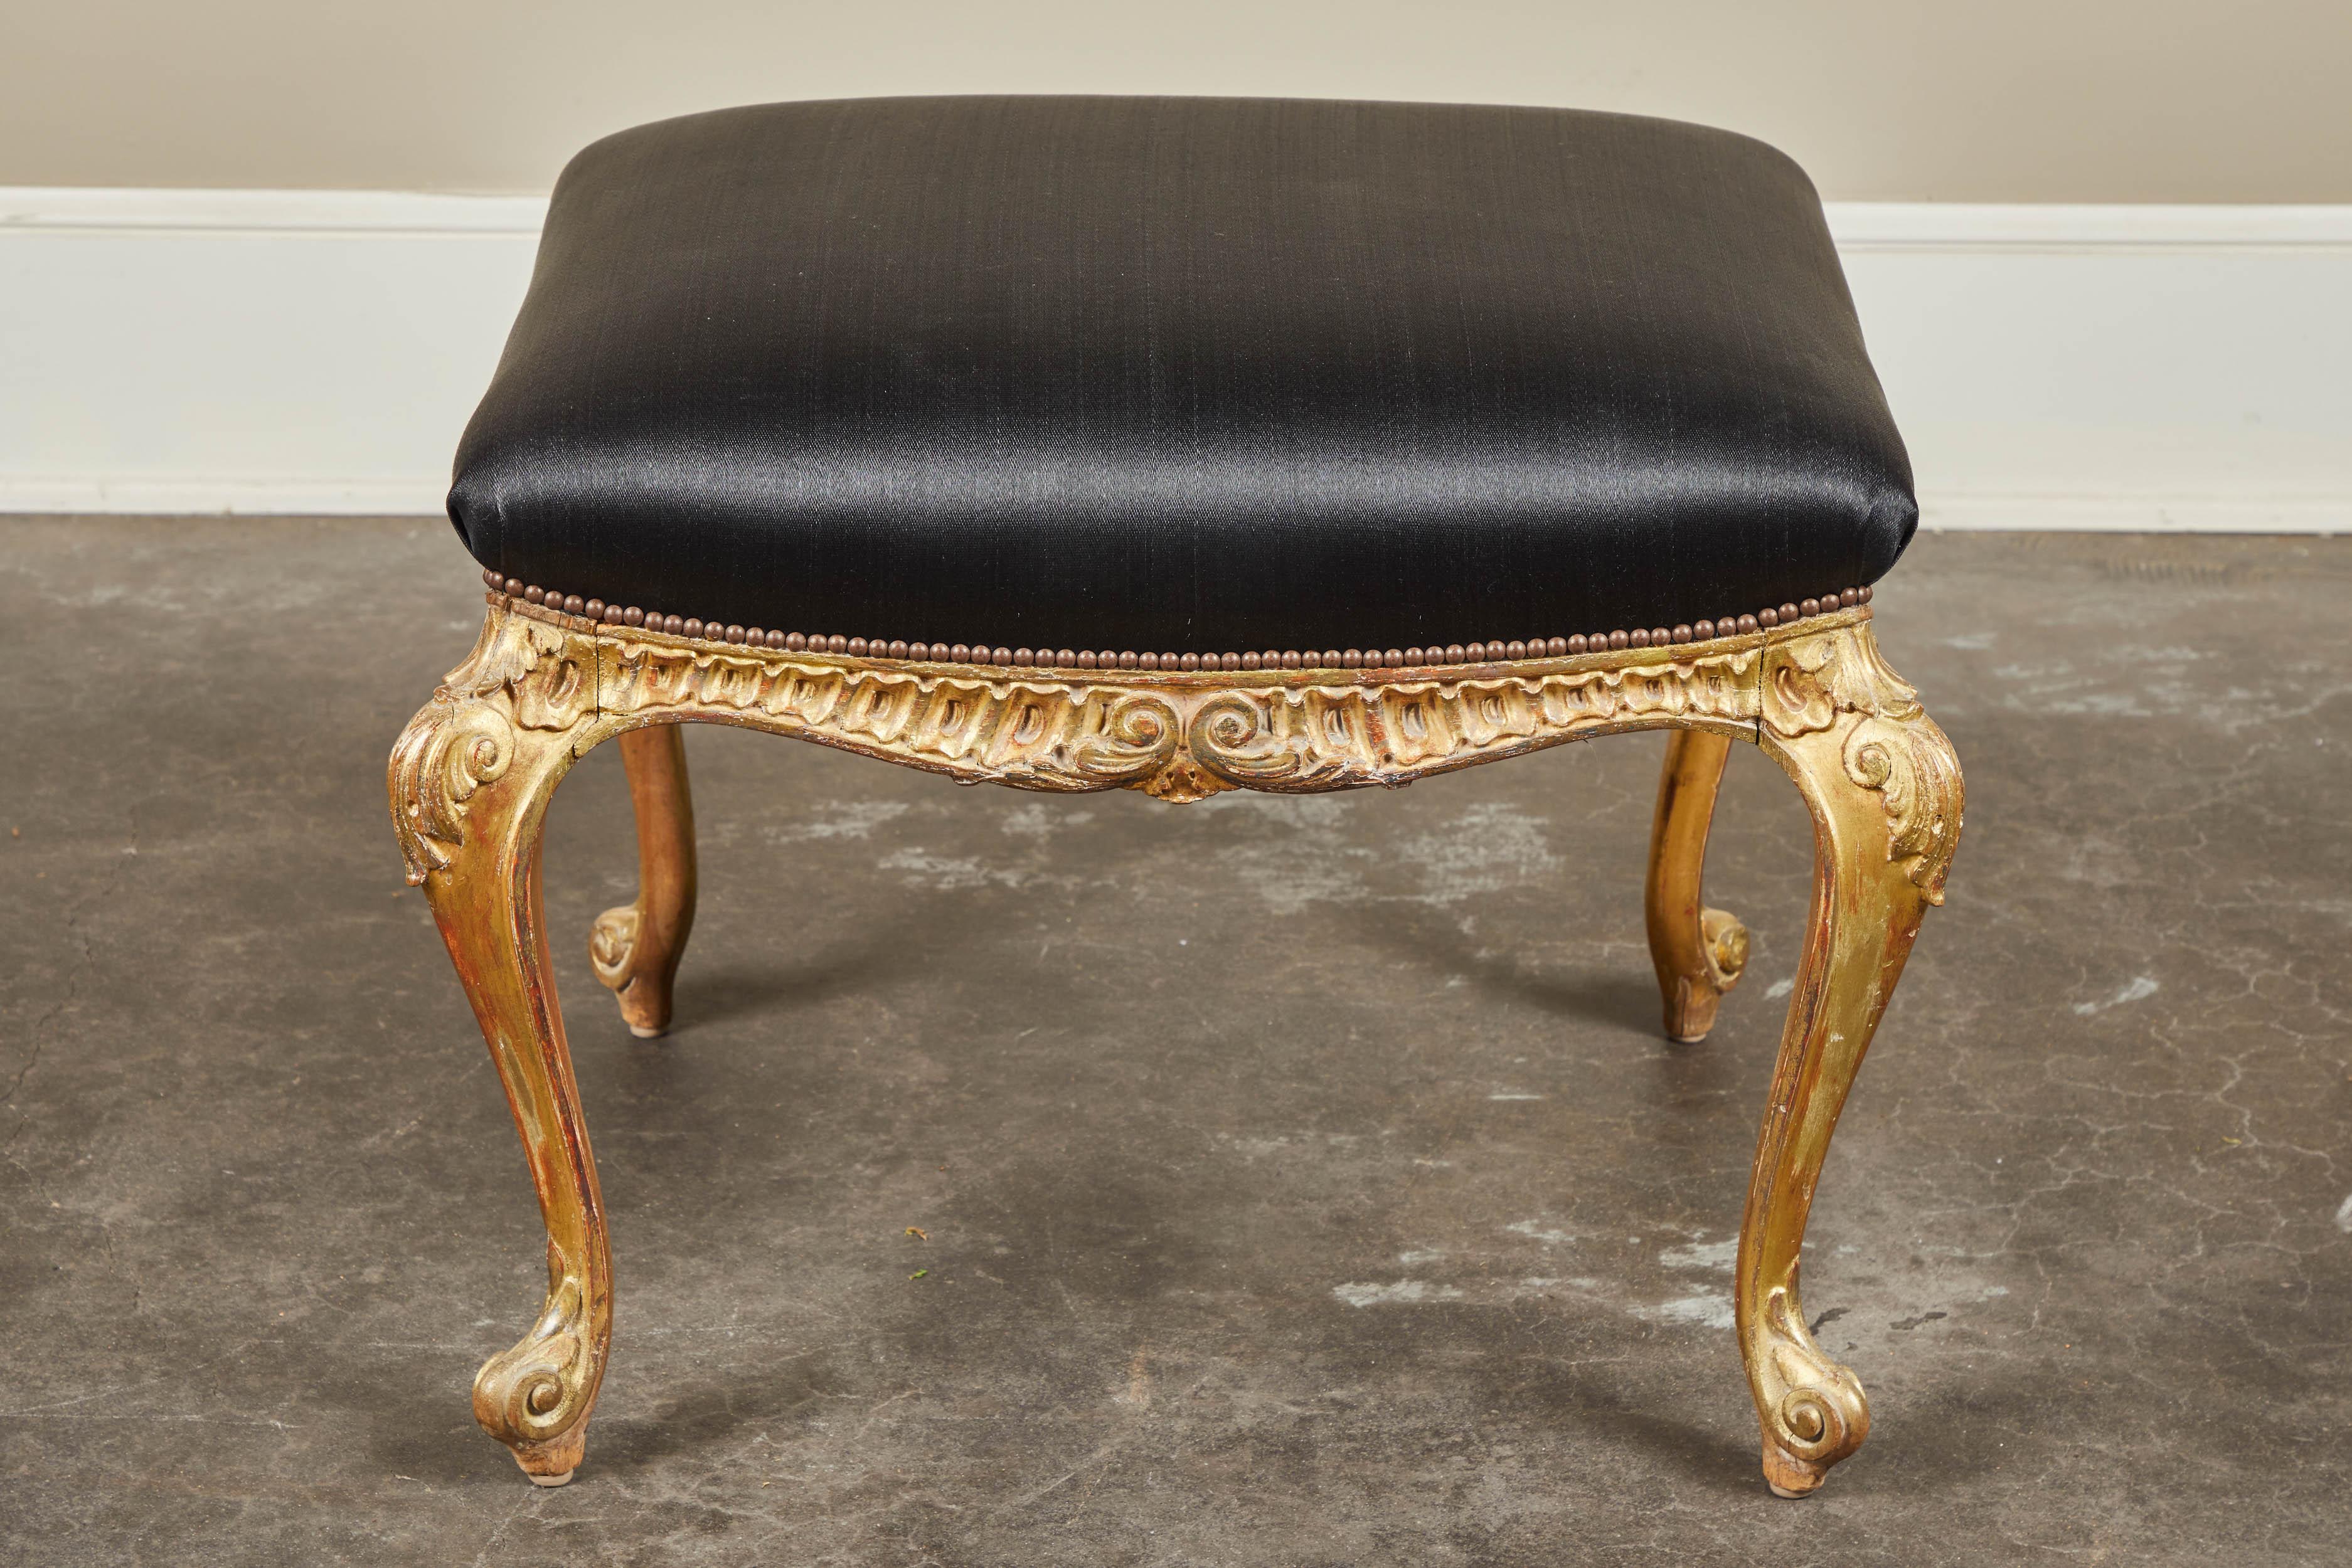 A 19th century Italian gilt and paint footstool with carved fleur de lieu and black horsehair upholstery.